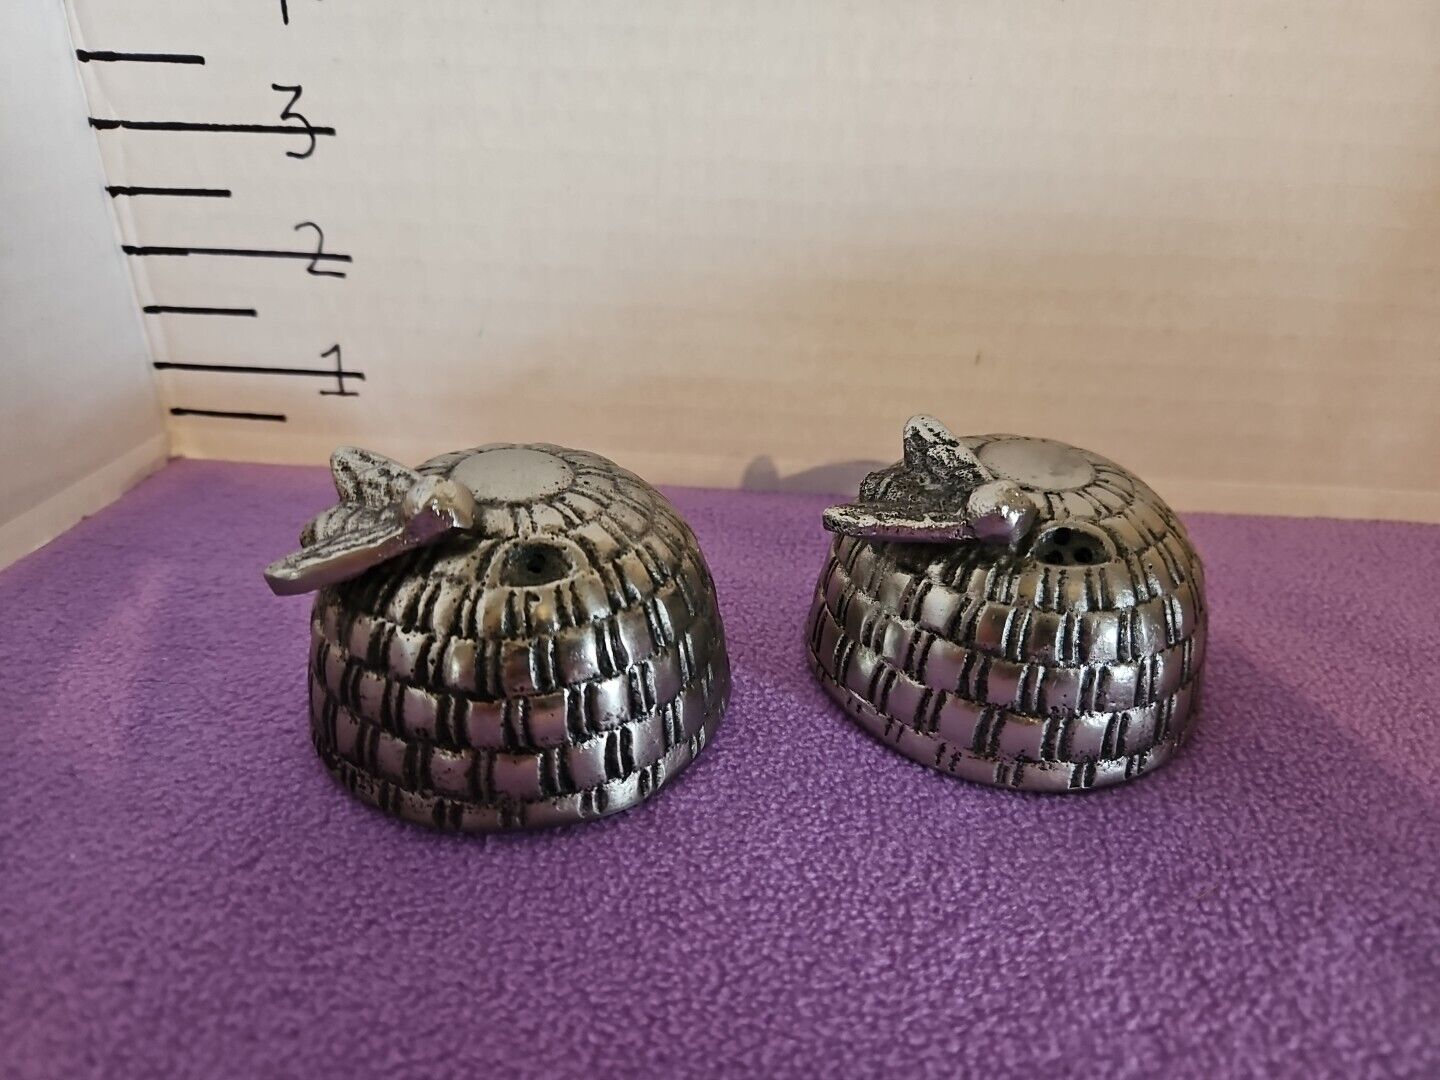 Shakers S&P Bee Hive Salt And Pepper Shakers